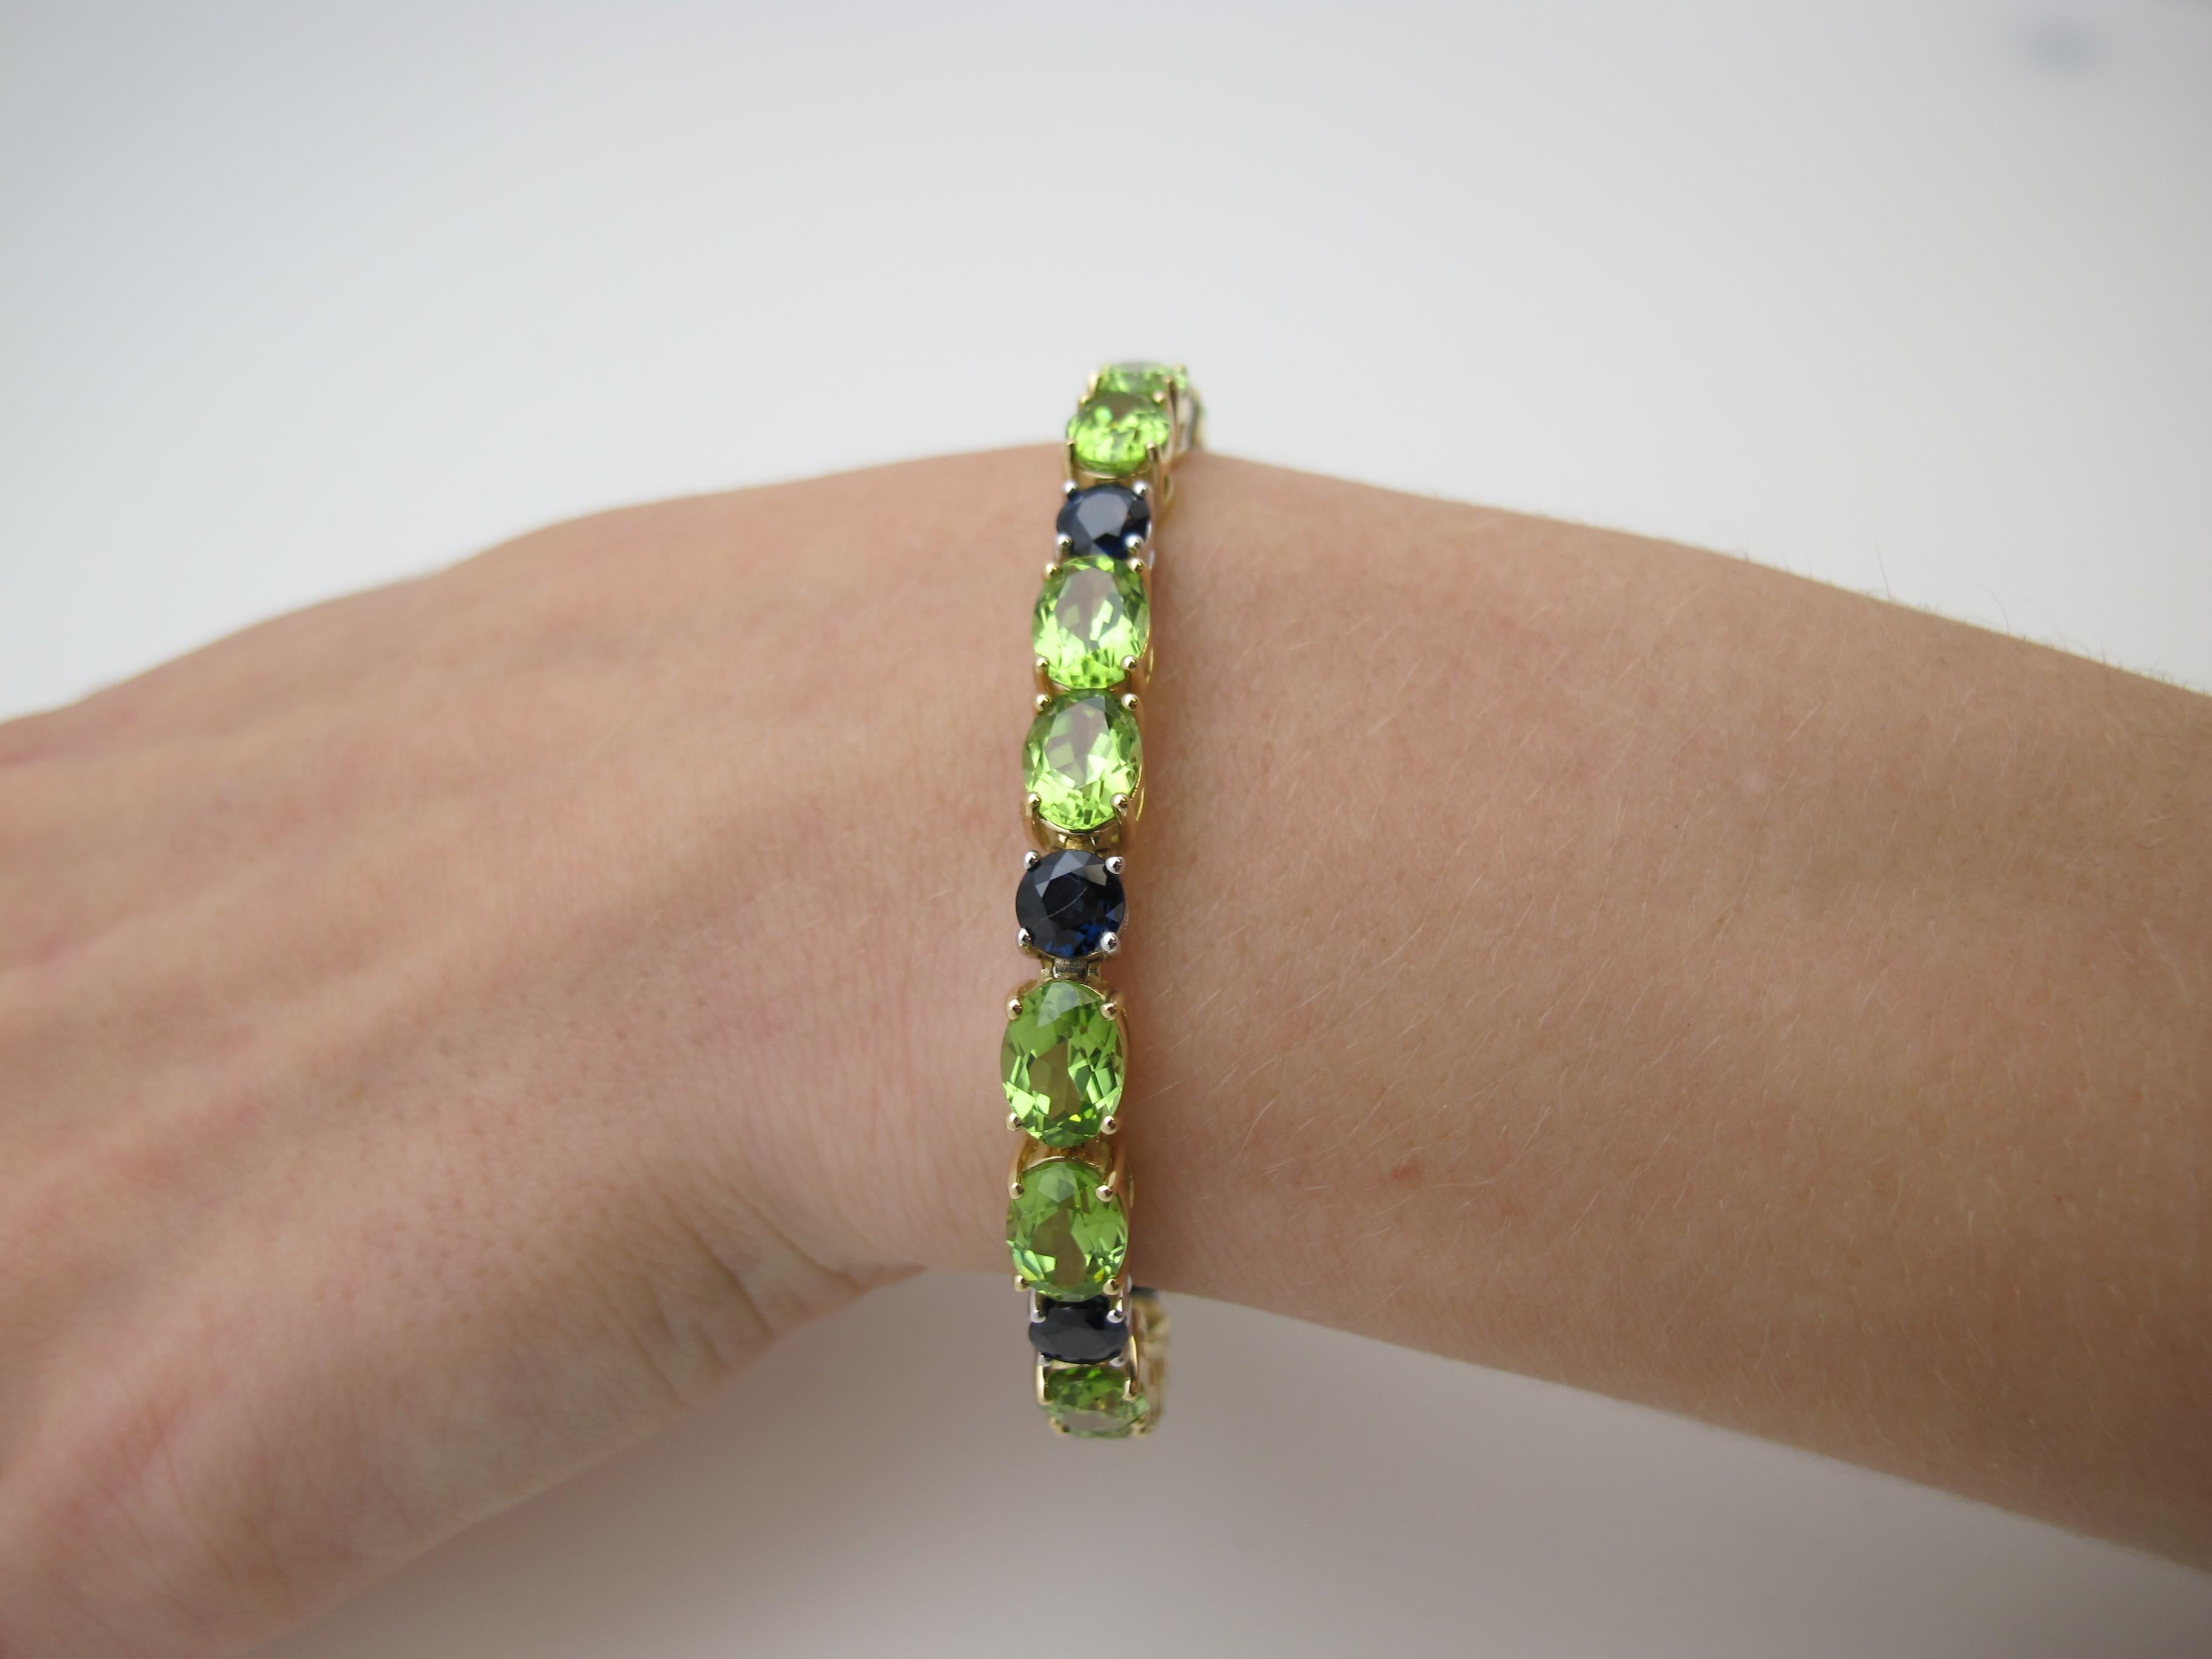 This modern take on the classic tennis bracelet features bright green peridots and rich blue sapphires set in a combination of 18k yellow and white gold. The sparkling oval peridots have been set in yellow gold to complement their bright, sunny hue,